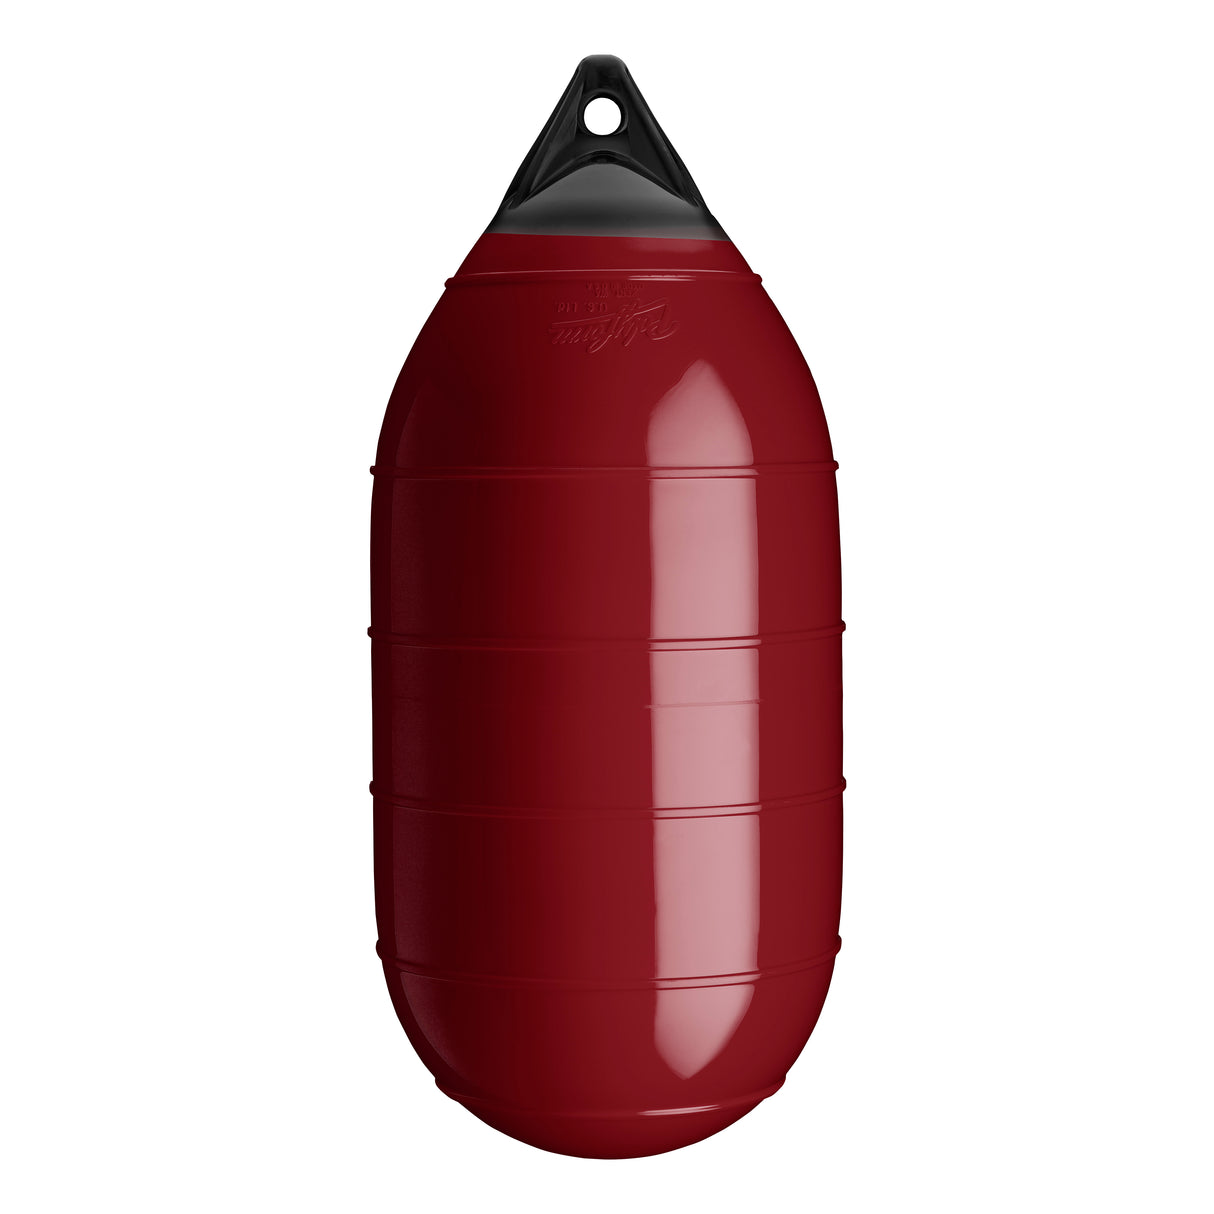 Burgundy low drag buoy with Black-Top, Polyform LD-3 